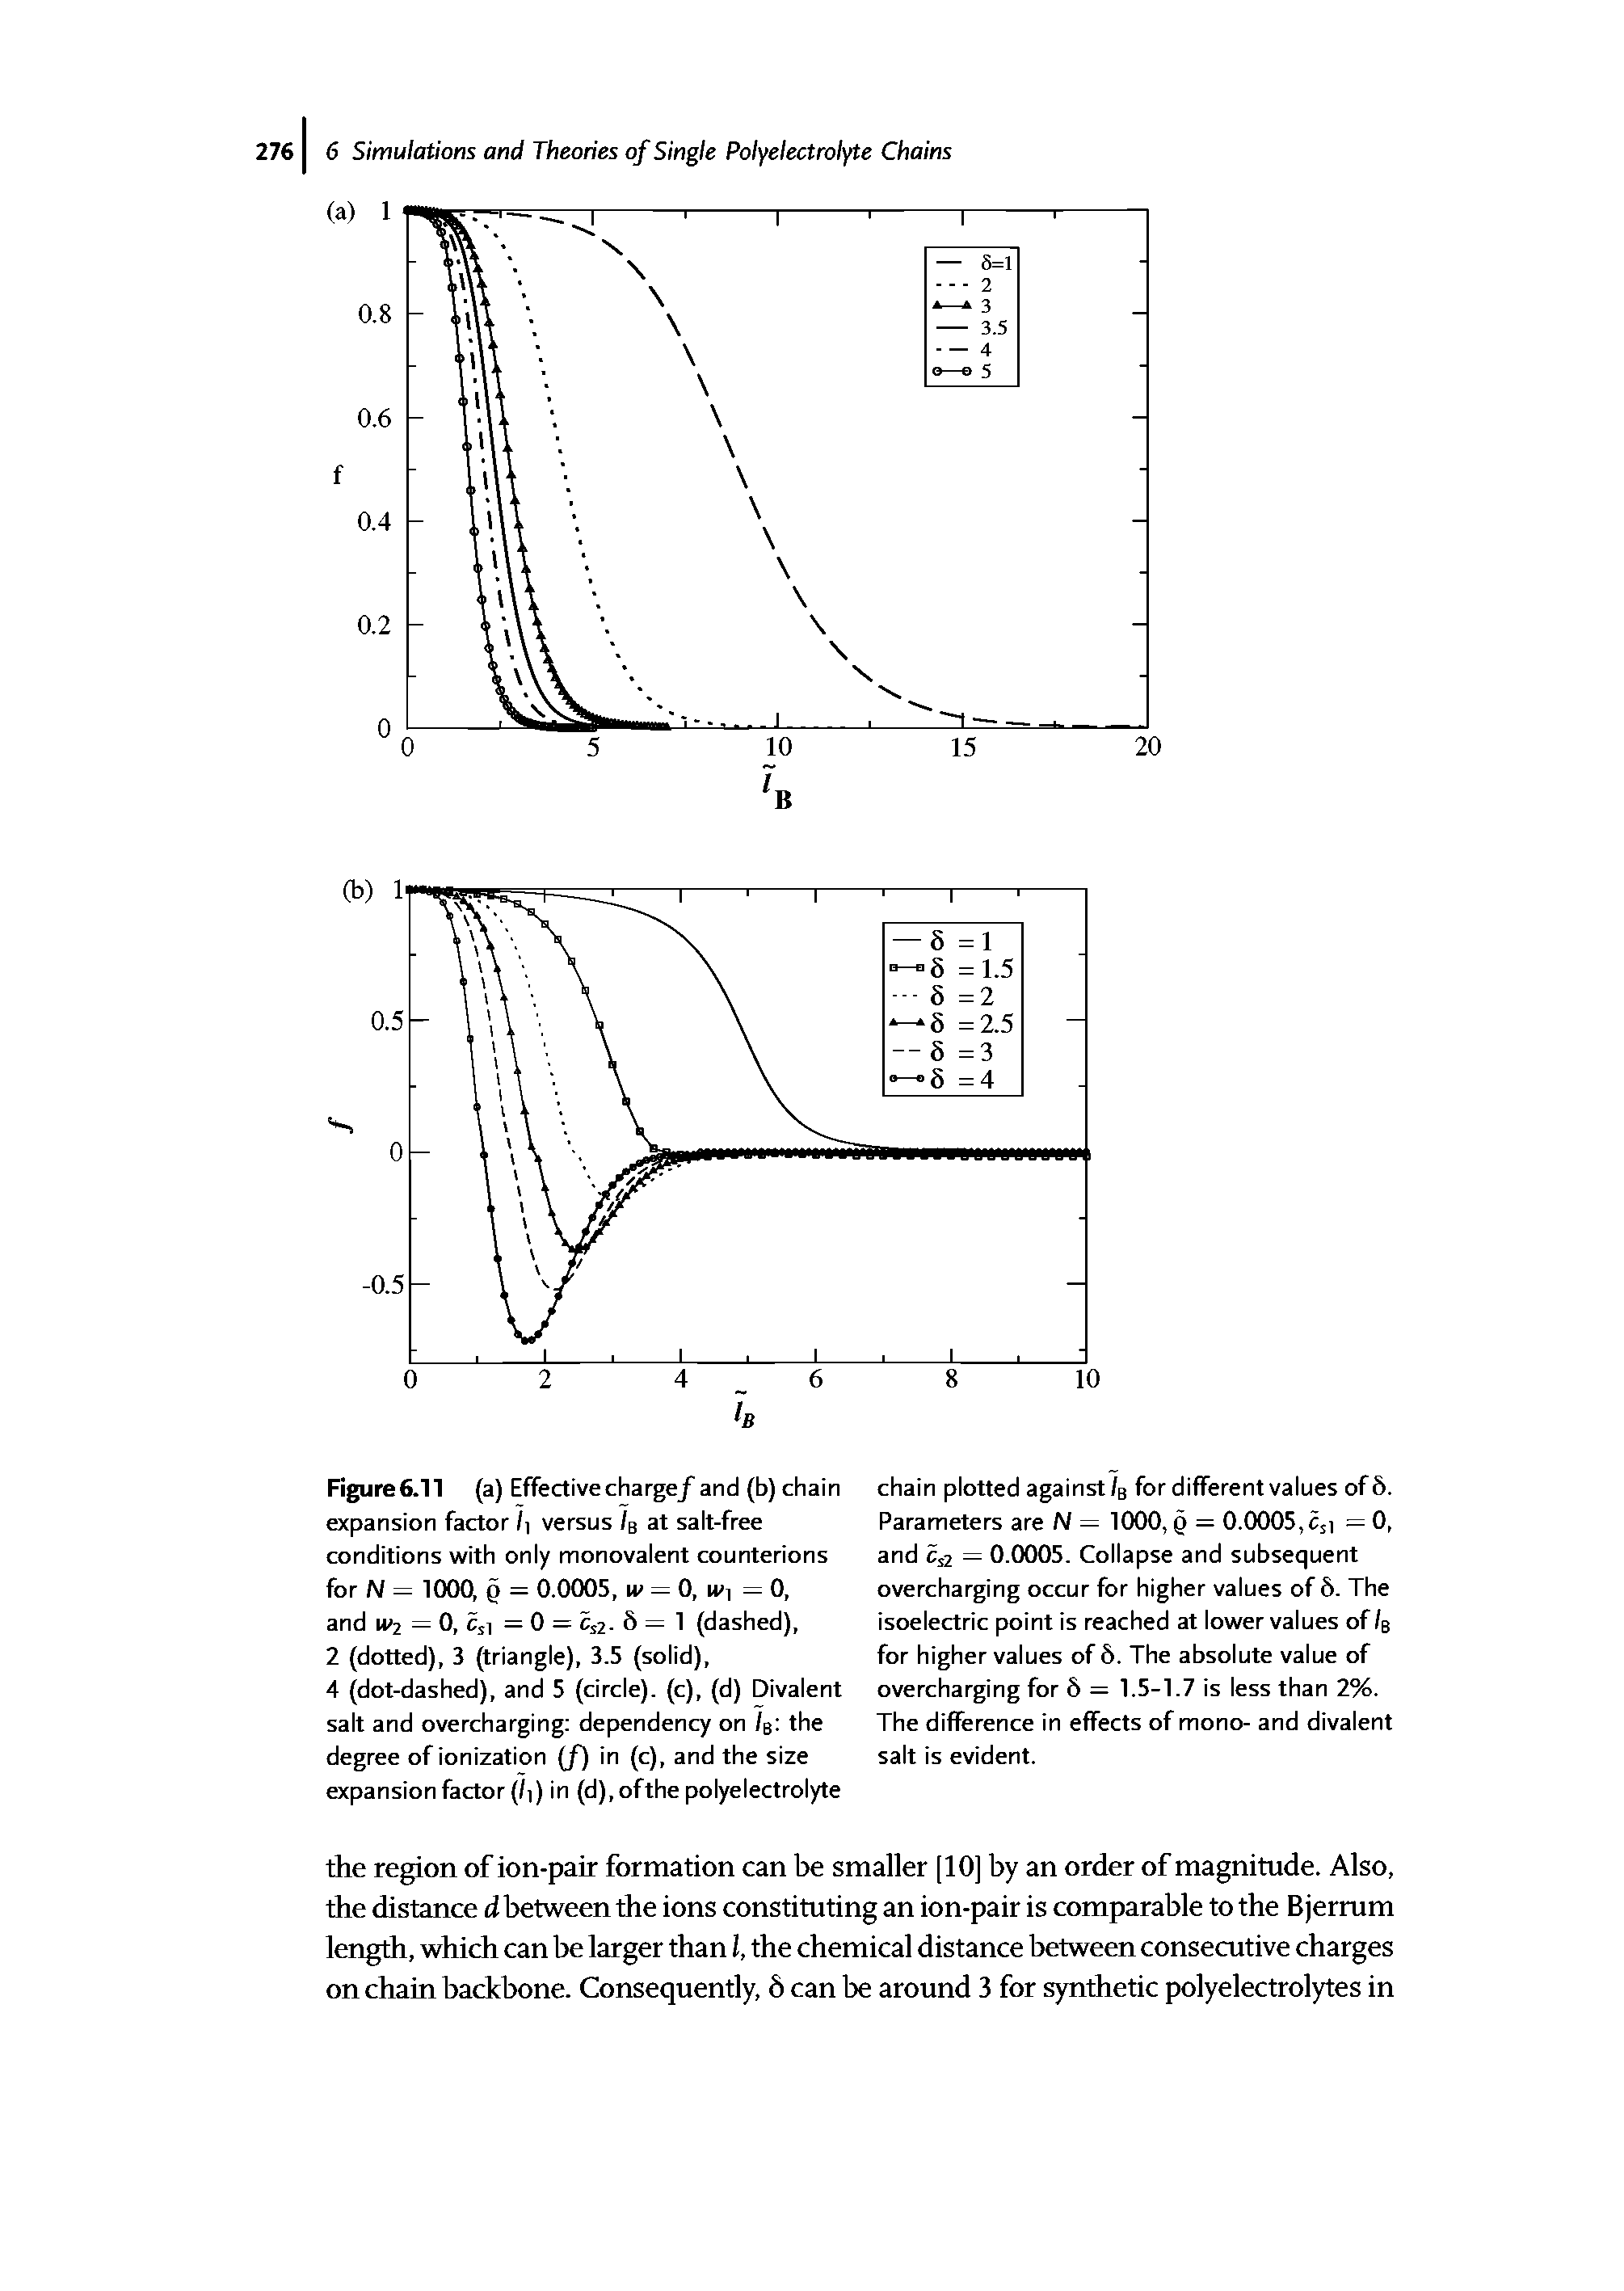 Figure6.11 (a) Effective charge/ and (b) chain expansion factor I] versus Ig at salt-free conditions with only monovalent counterions for N = 1000, Q - 0.0005, iv = 0, iV] =0, and IV2 = 0, Cs) = 0 = 2- S = 1 (dashed),...